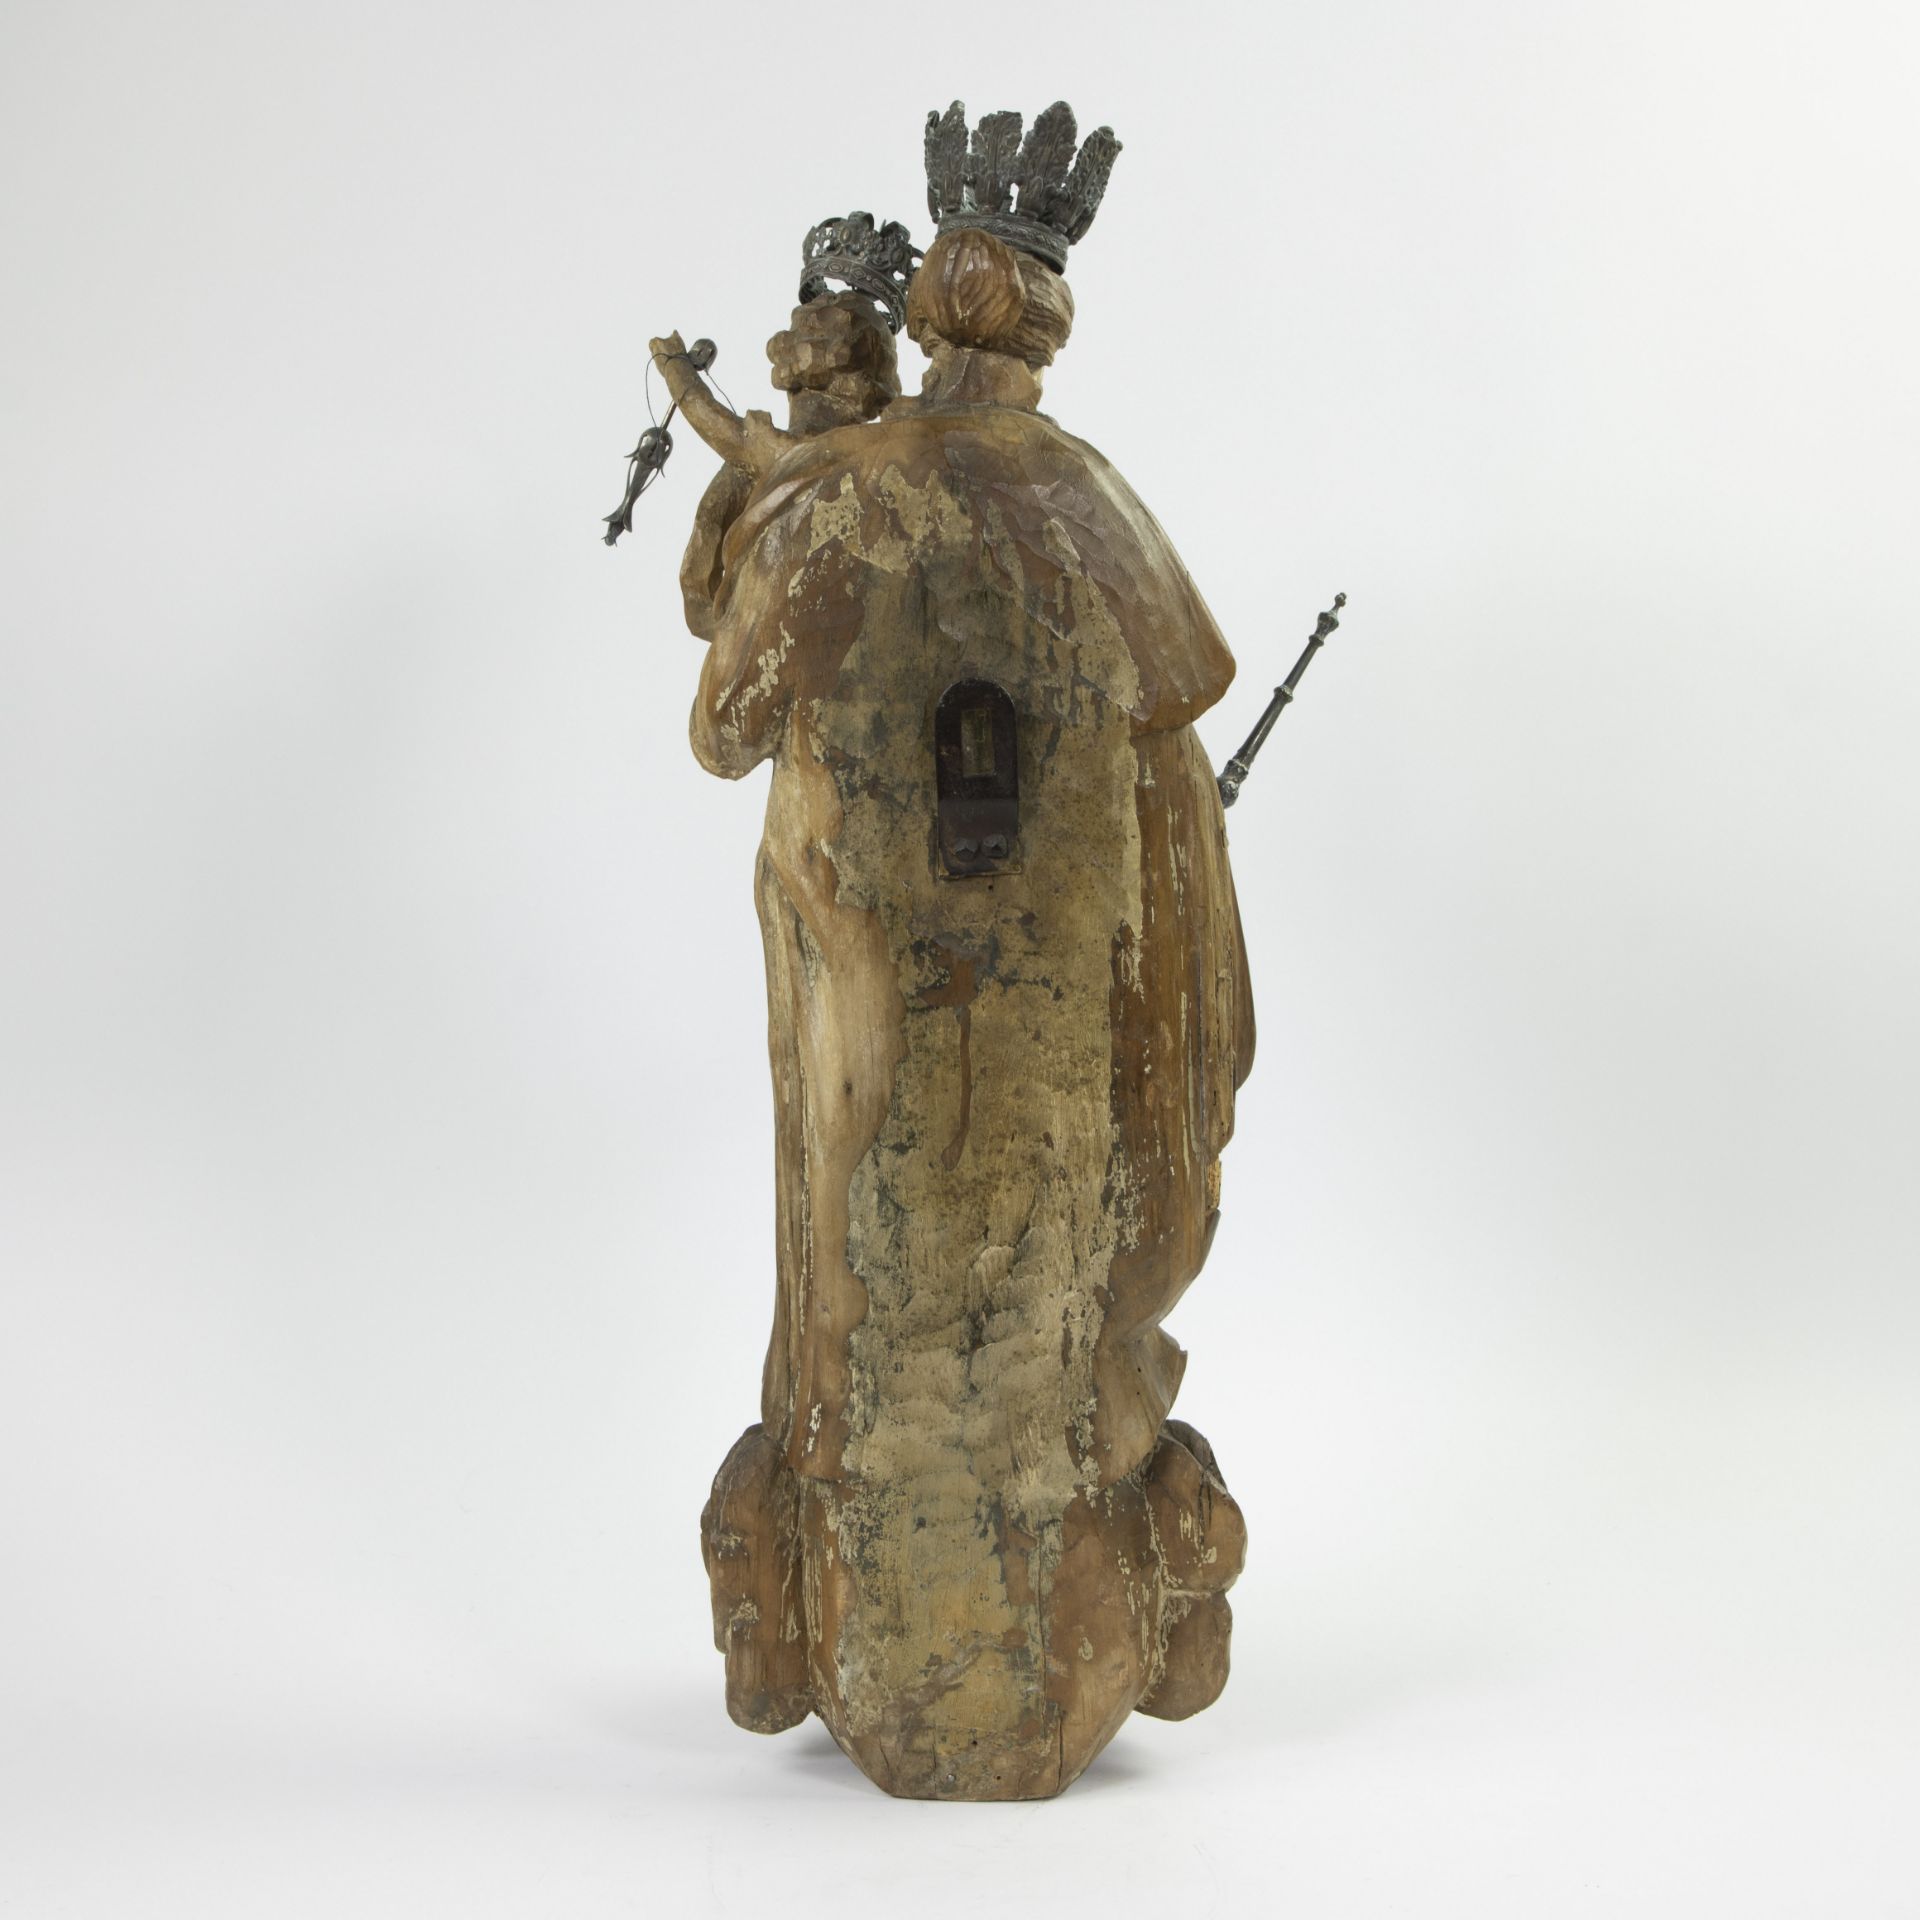 Madonna and child on globe and crescent moon, oak wood, 18th century, traces of polychromy - Image 3 of 4